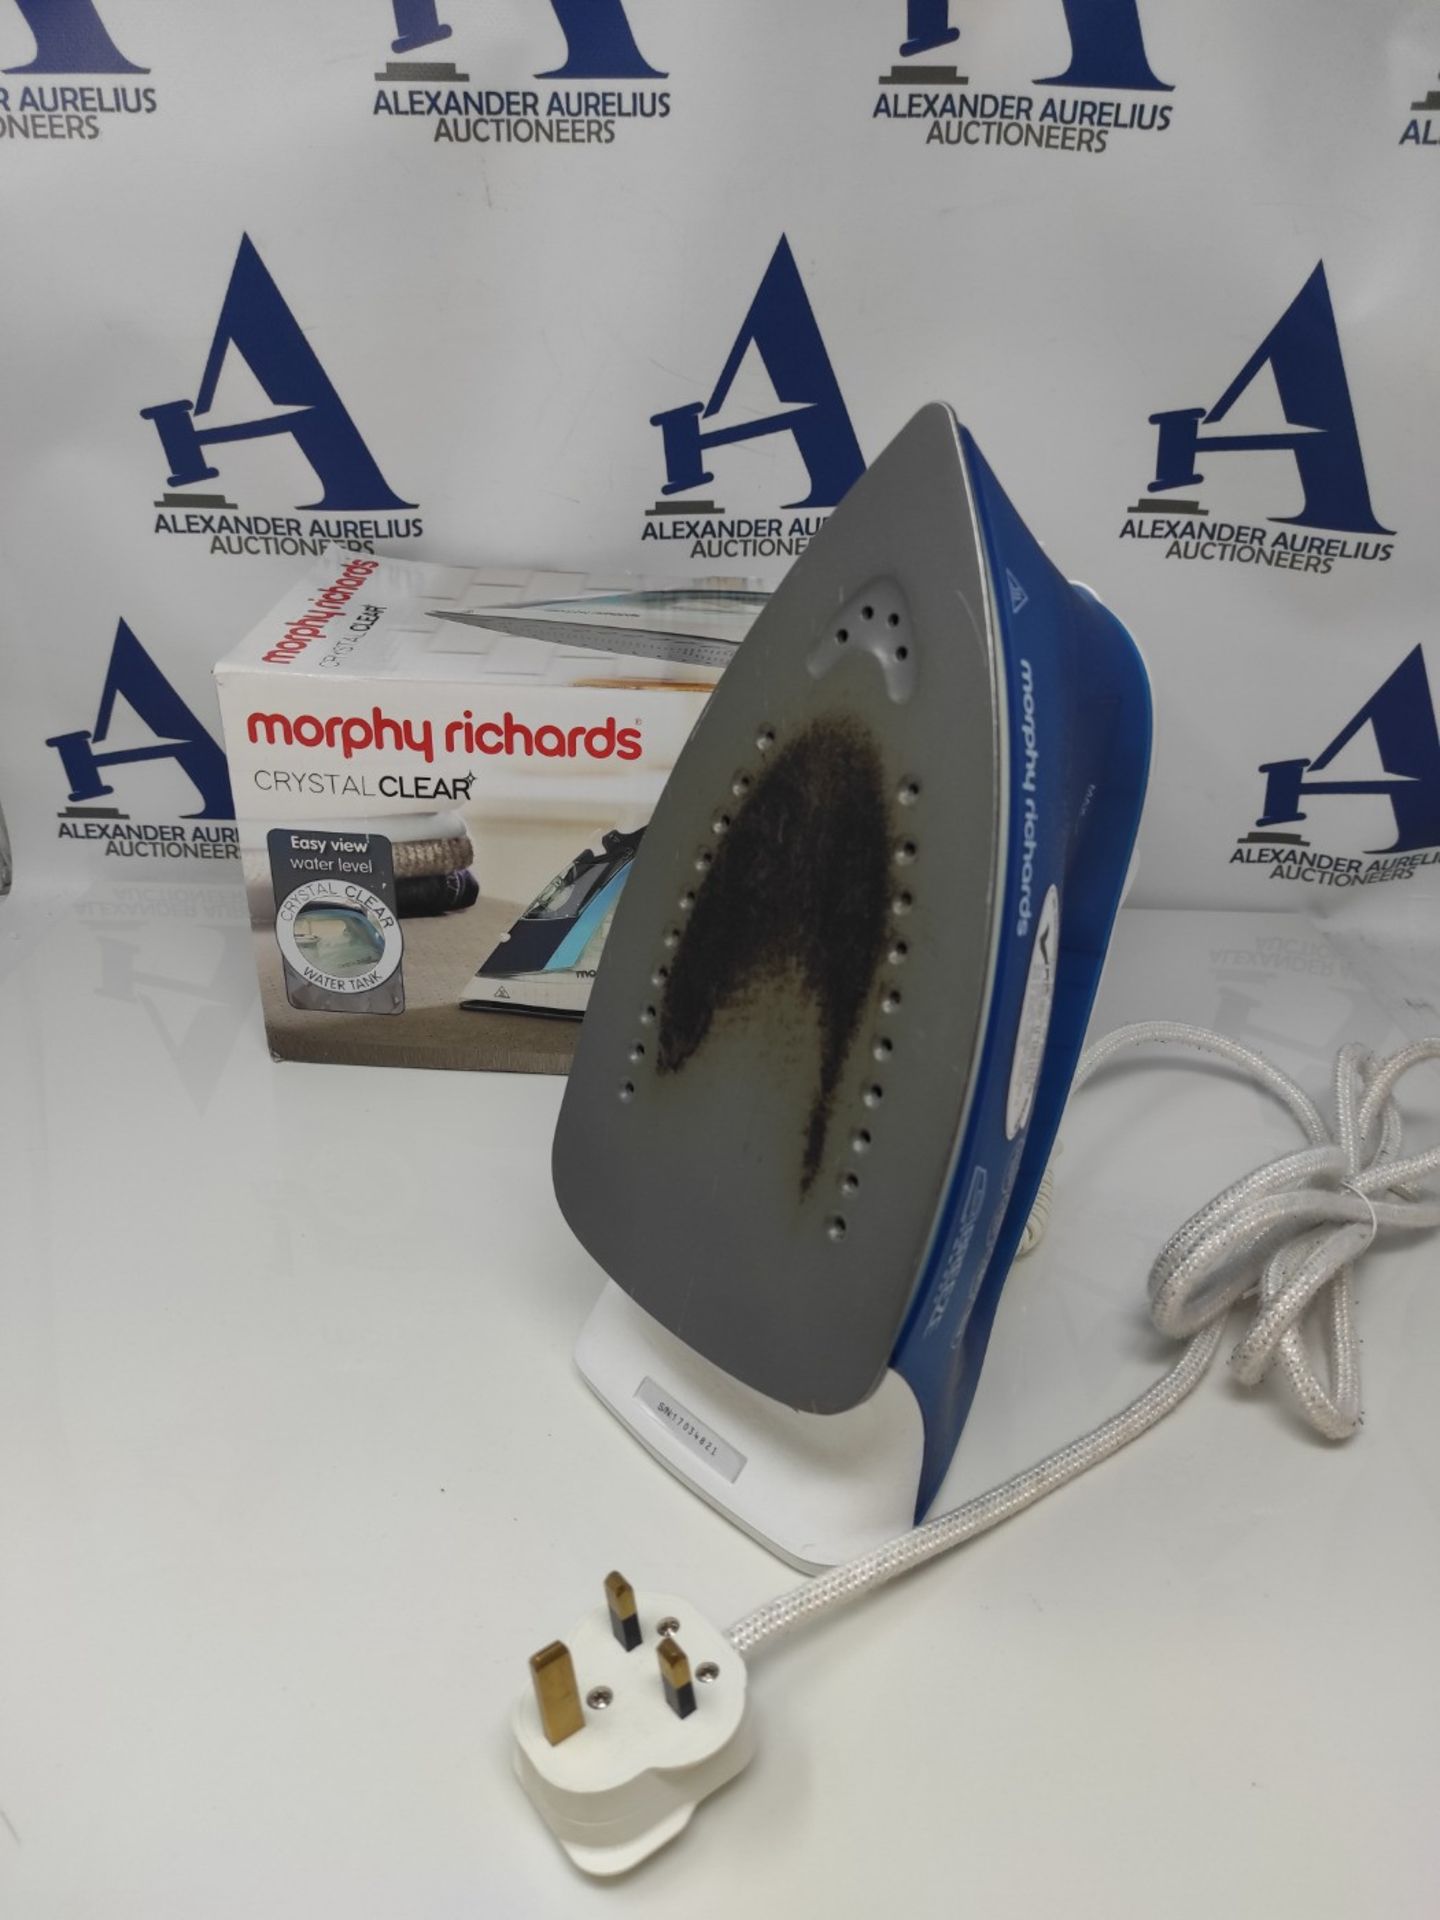 Morphy Richards 300300 Crystal Clear Steam Iron, Turqoise/White - Image 2 of 3